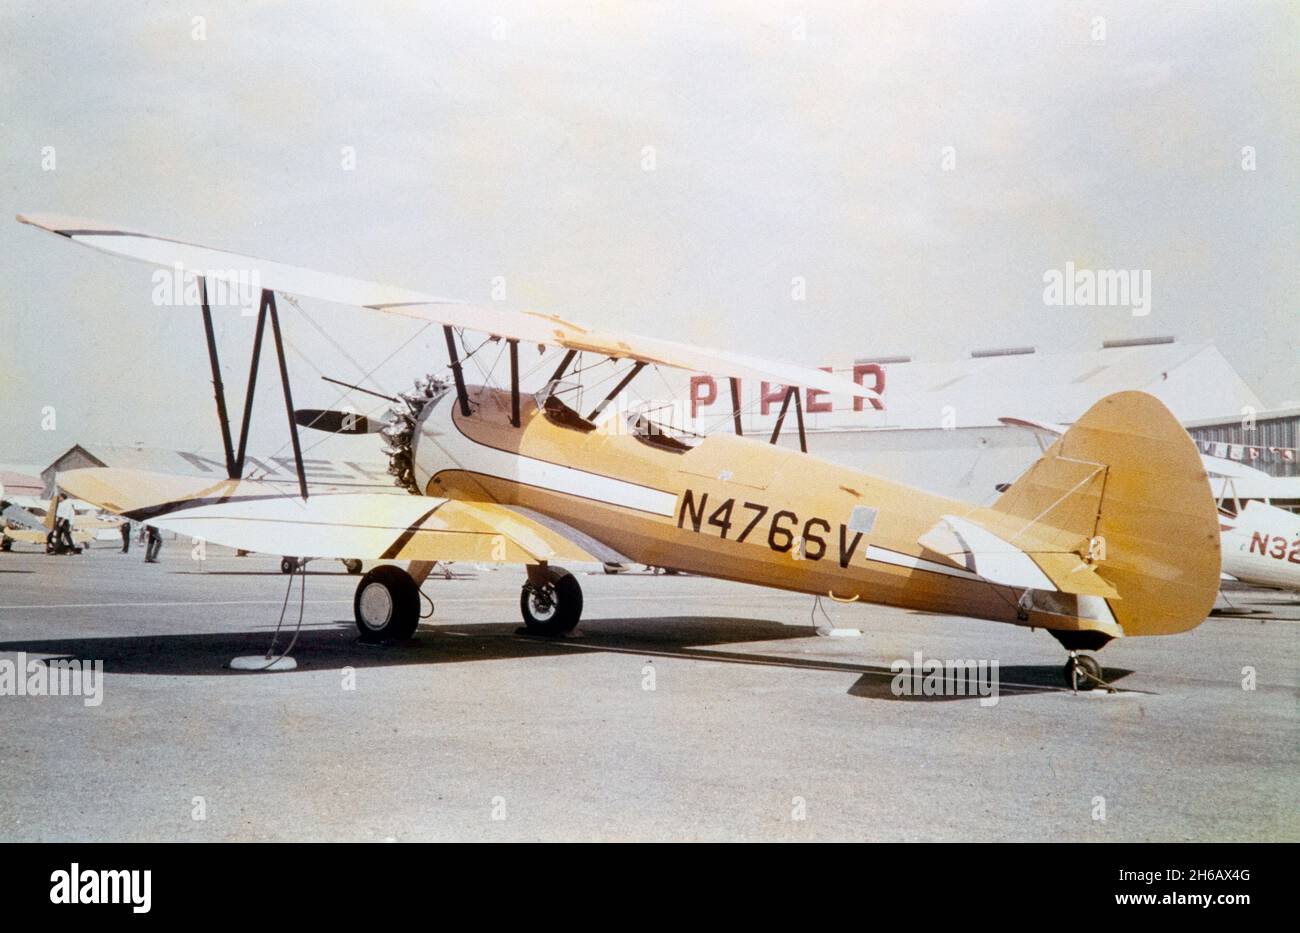 Vintage photograph taken on 5th June 1965 at The Antique Airplane Association Fly-In at Merced, California, USA. A Stearman 75, serial number N4766V, powered by a Pratt and Whitney R-985 engine. Stock Photo